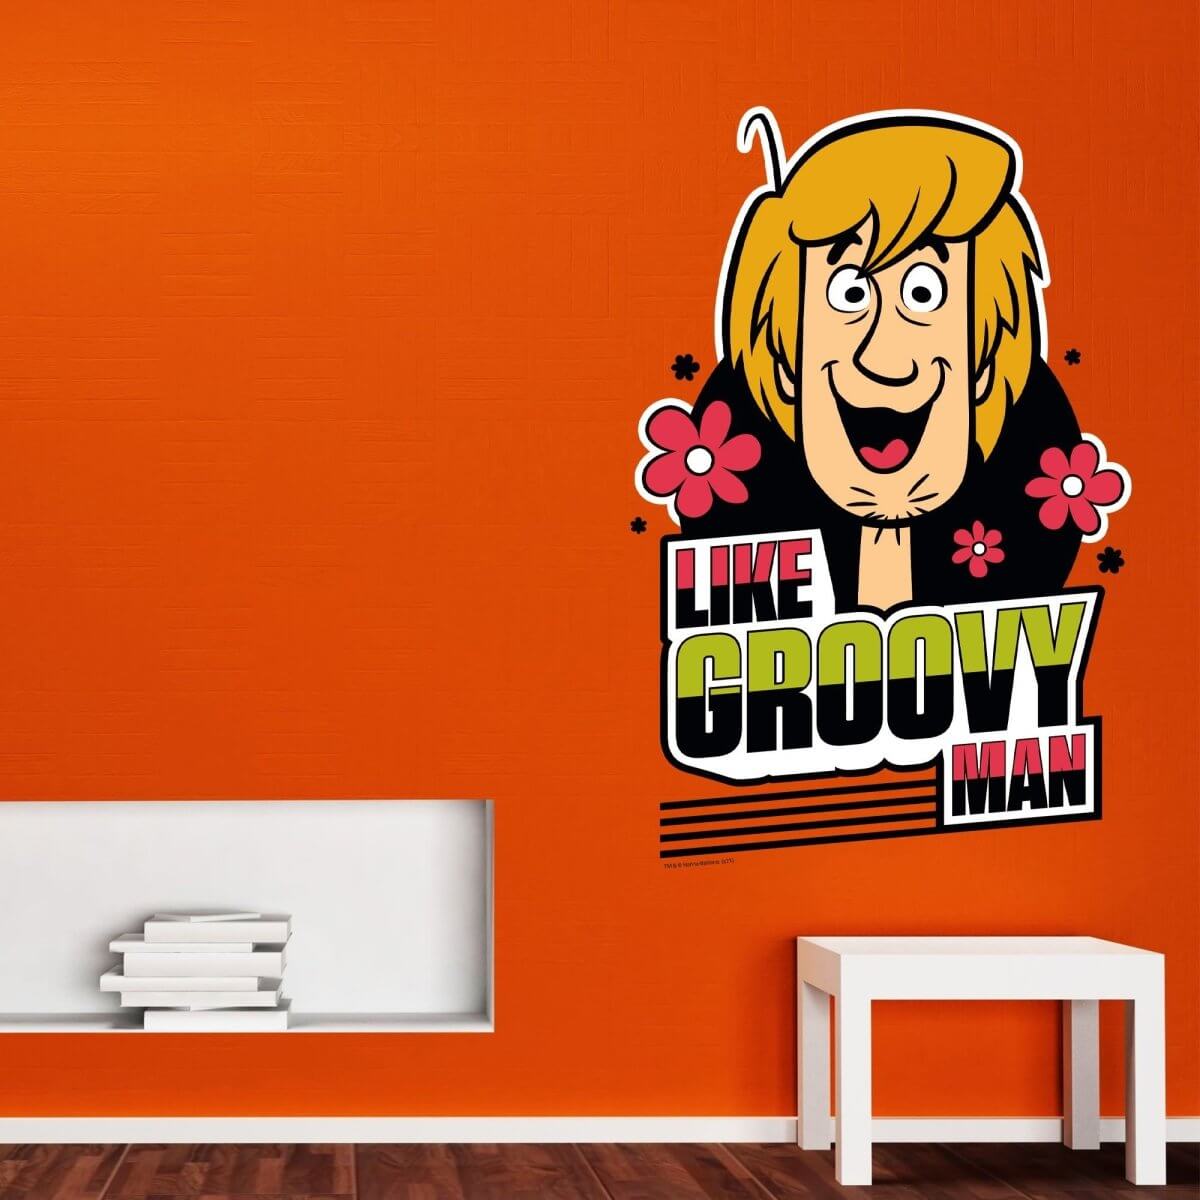 Kismet Decals Home & Room Decor Scooby-Doo Groovy Shaggy Wall decal sticker - officially licensed - latex printed with no solvent odor - Kismet Decals